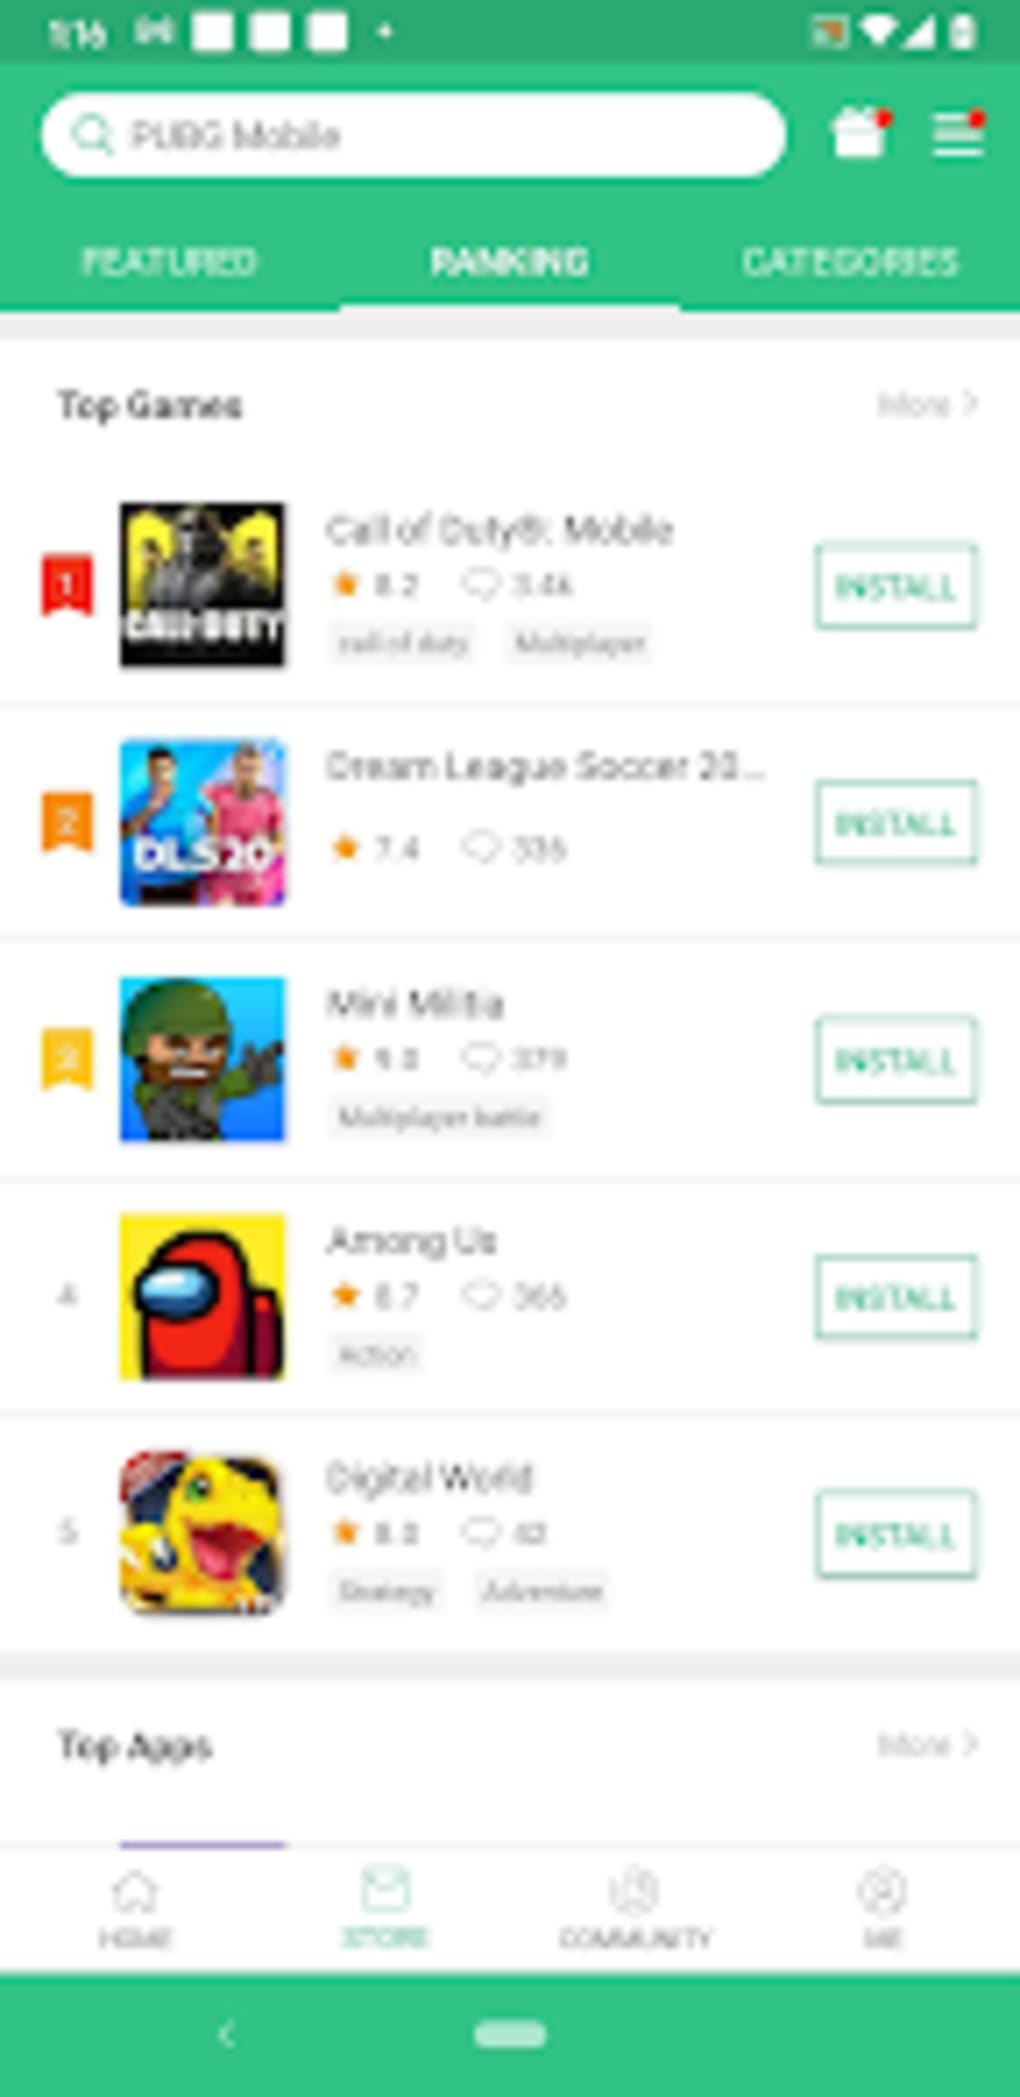 Latest APK Games & Latest Android Apps Free Download